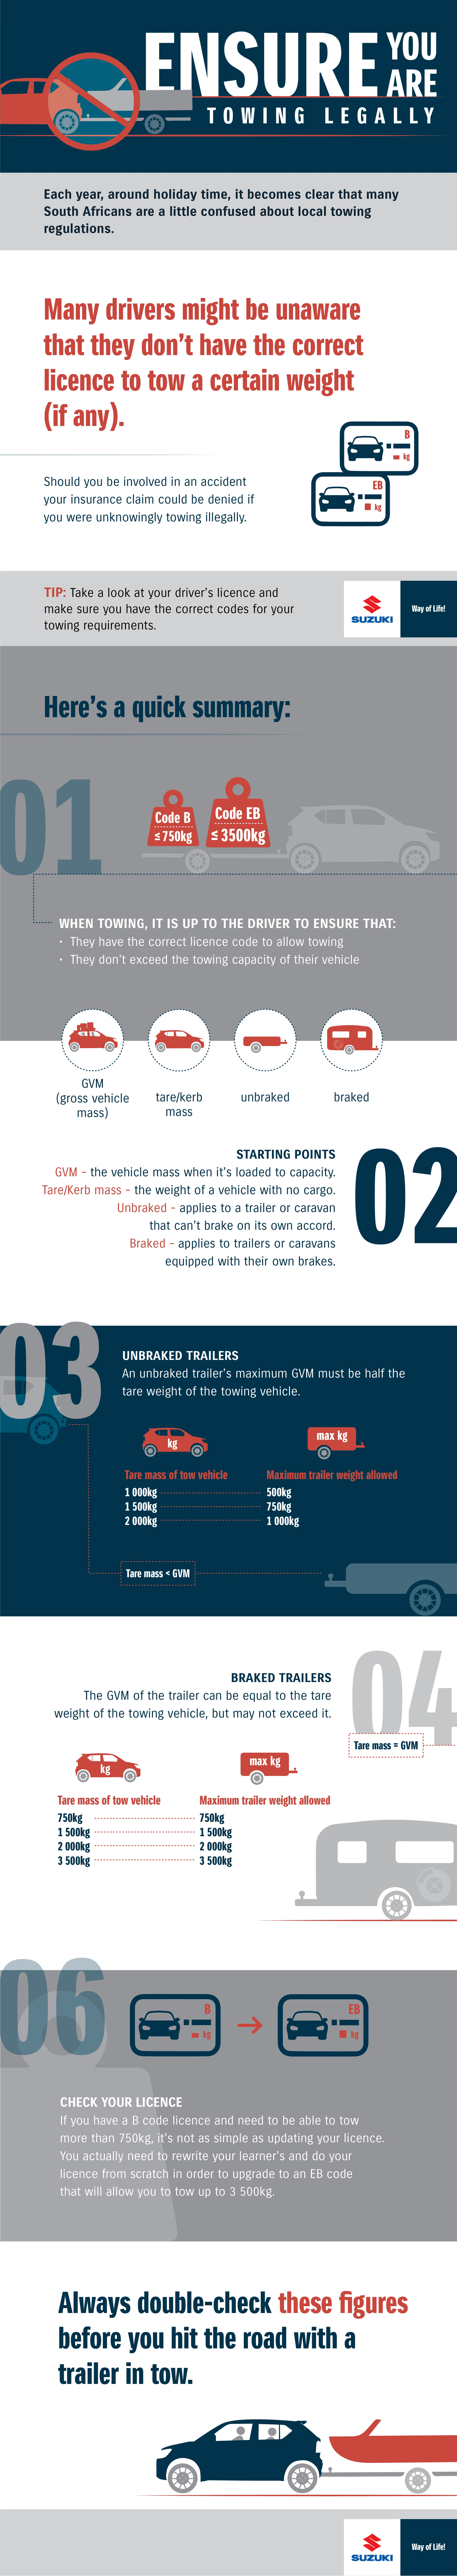 Ensure you are towing legally in South Africa | Suzuki Infographic